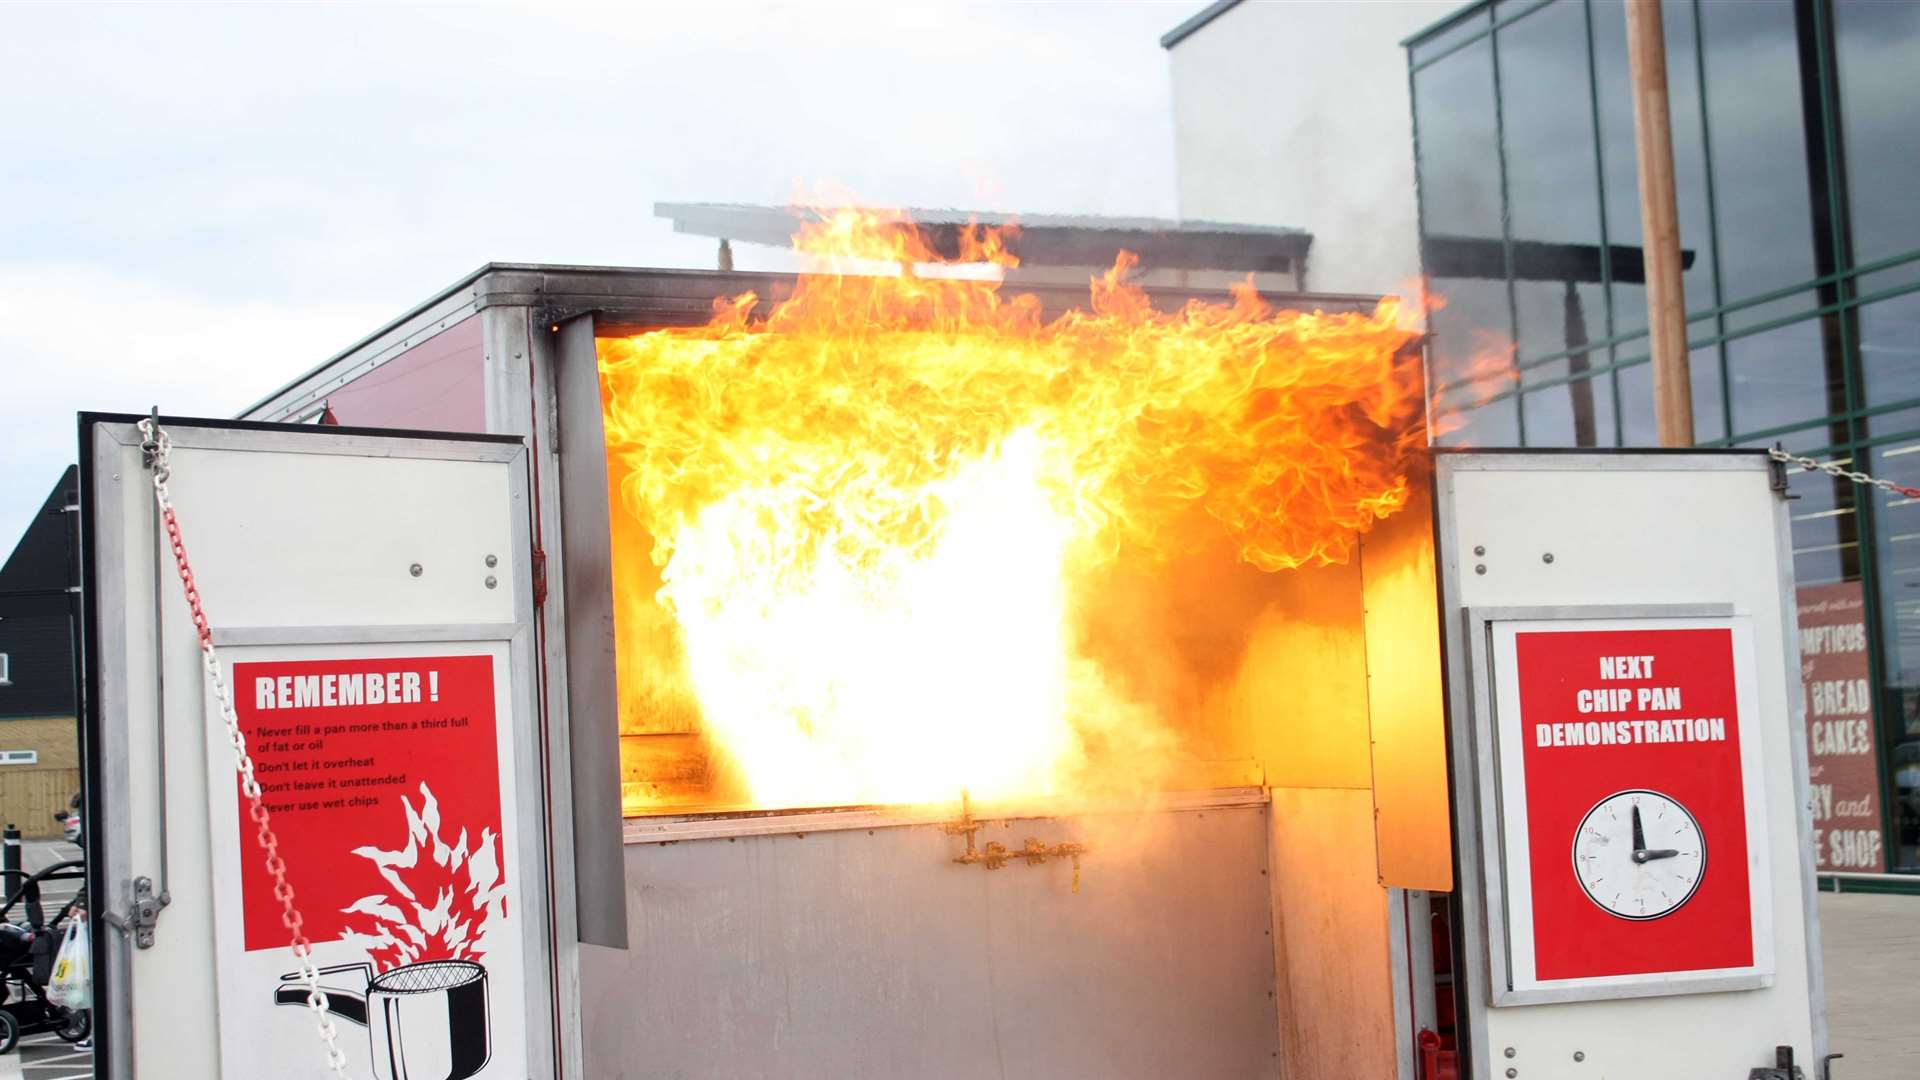 Firefighters have carried out demonstrations before about the effects of chip pan fires. File image